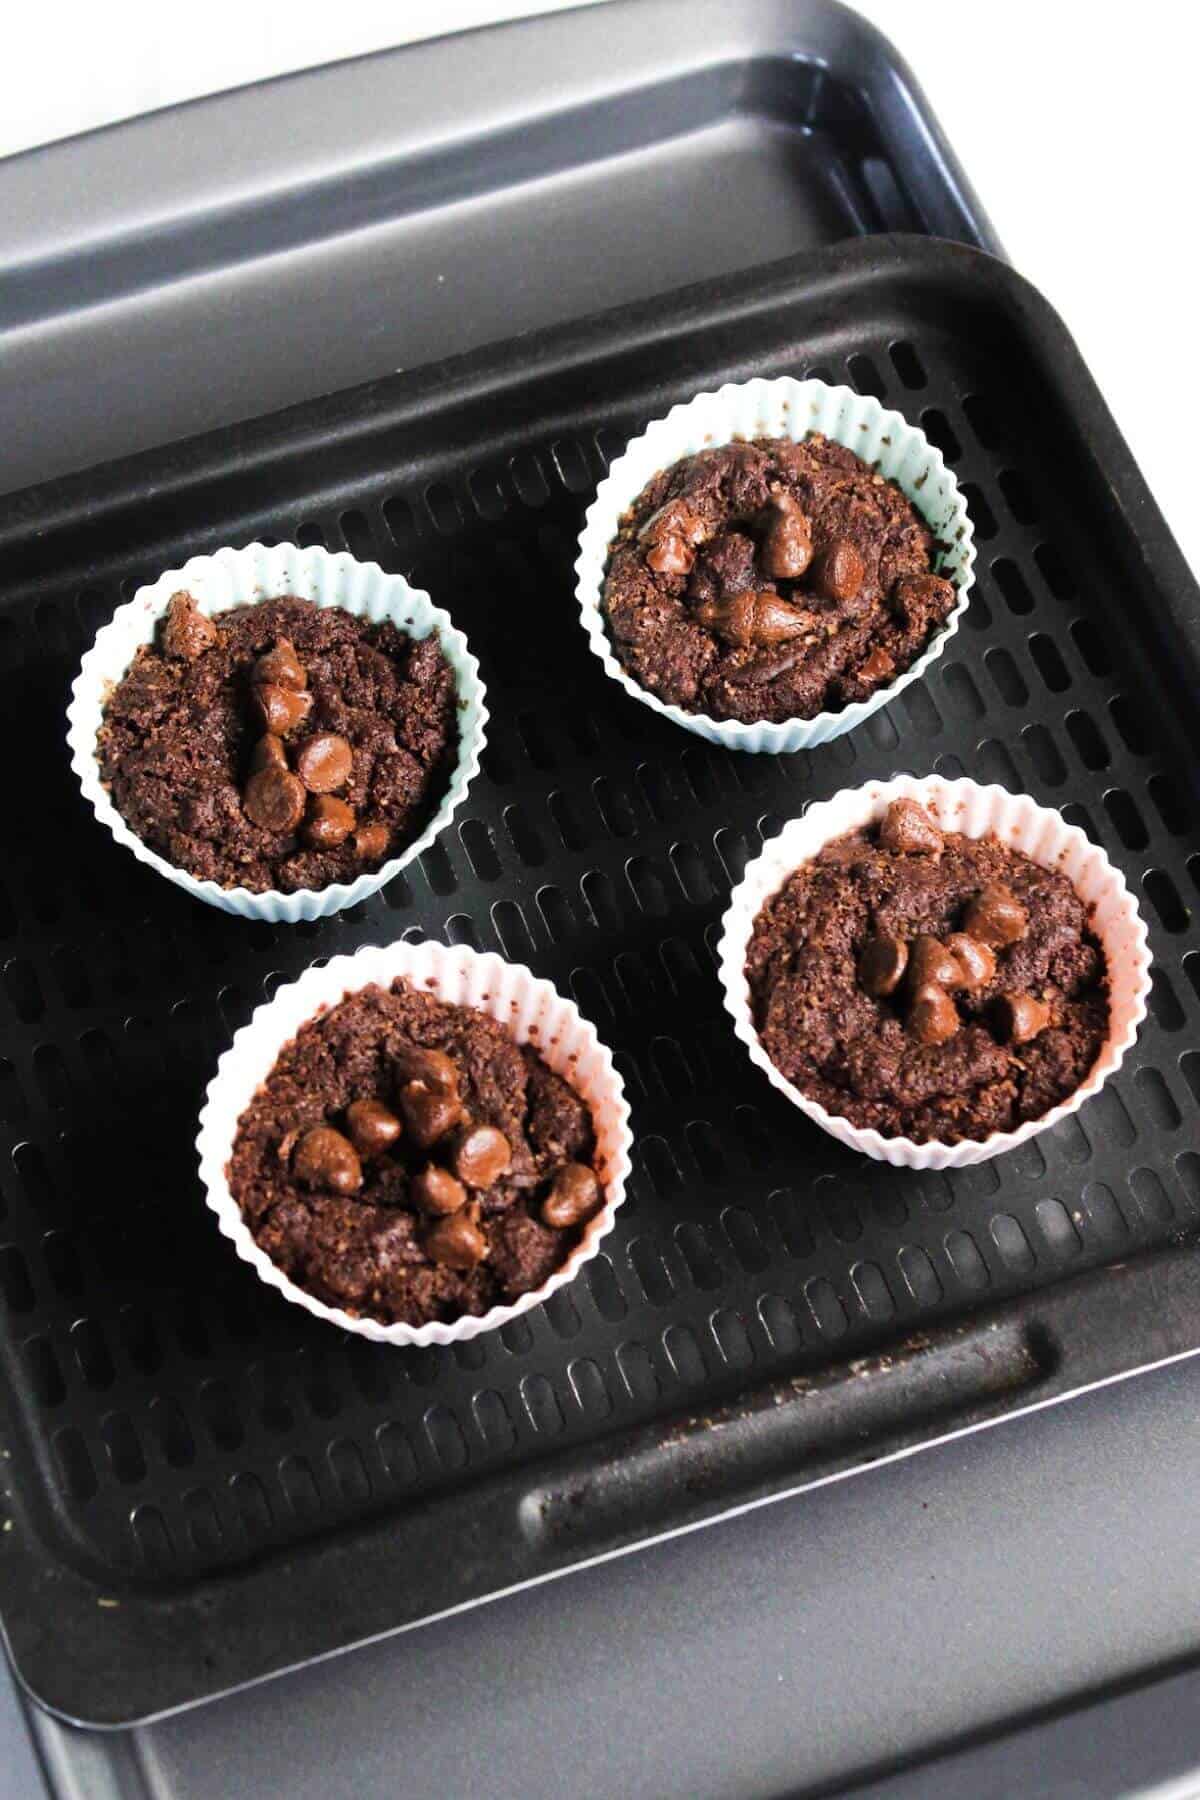 Four brownie bites in colorful paper cups on a baking tray.